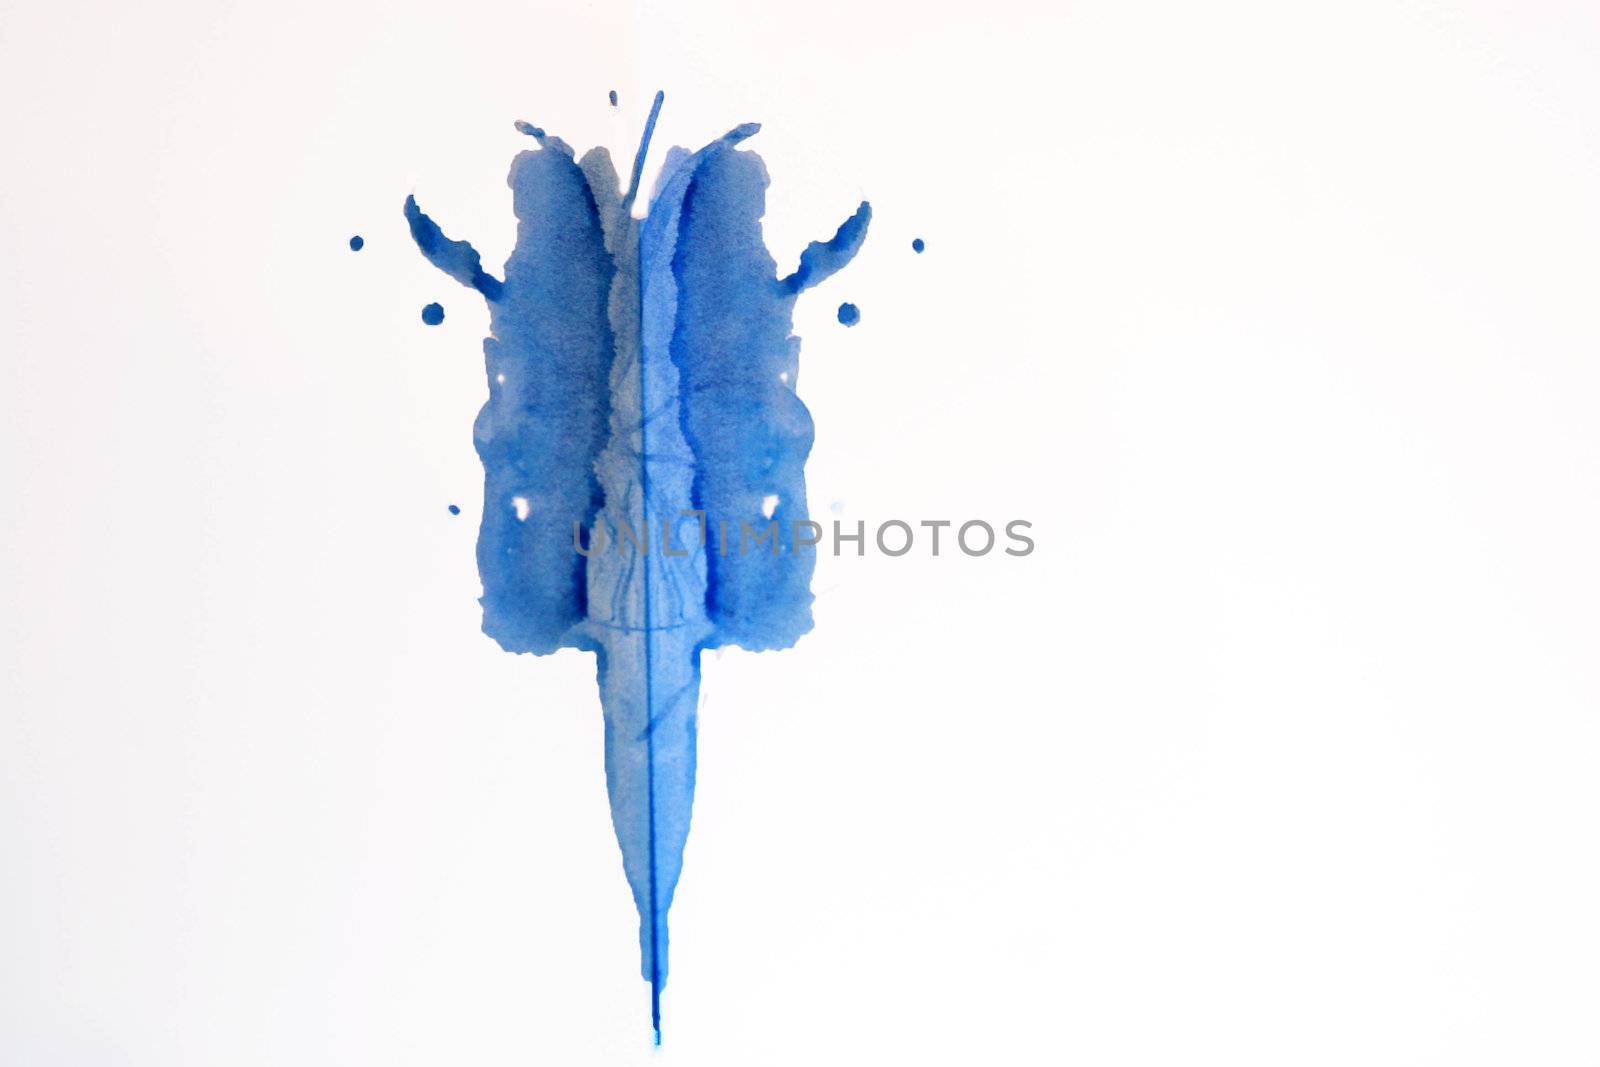 rorschach test, blue ink stains on a white paper sheet by valentinacarpin